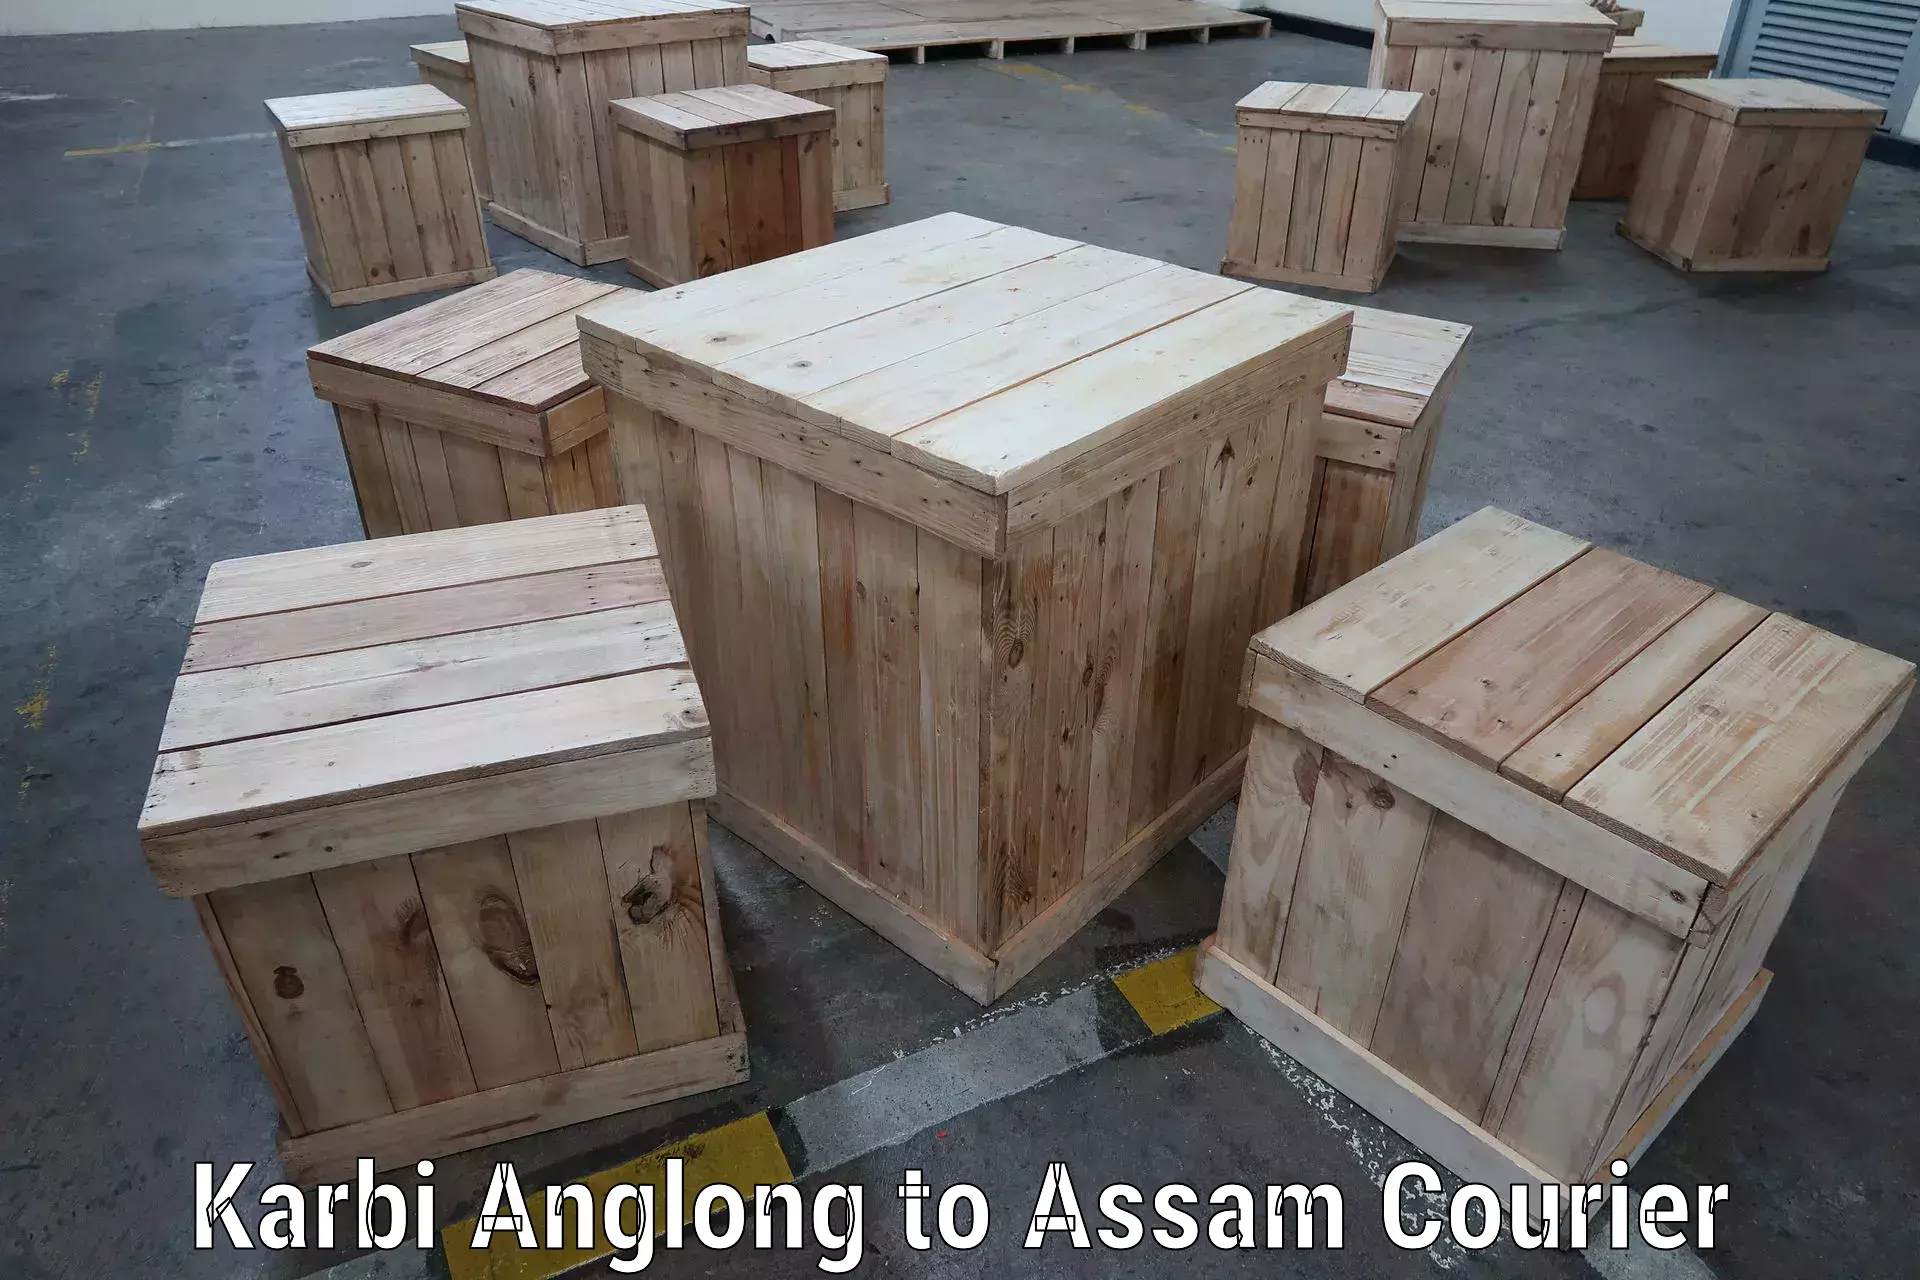 Efficient shipping operations in Karbi Anglong to Guwahati